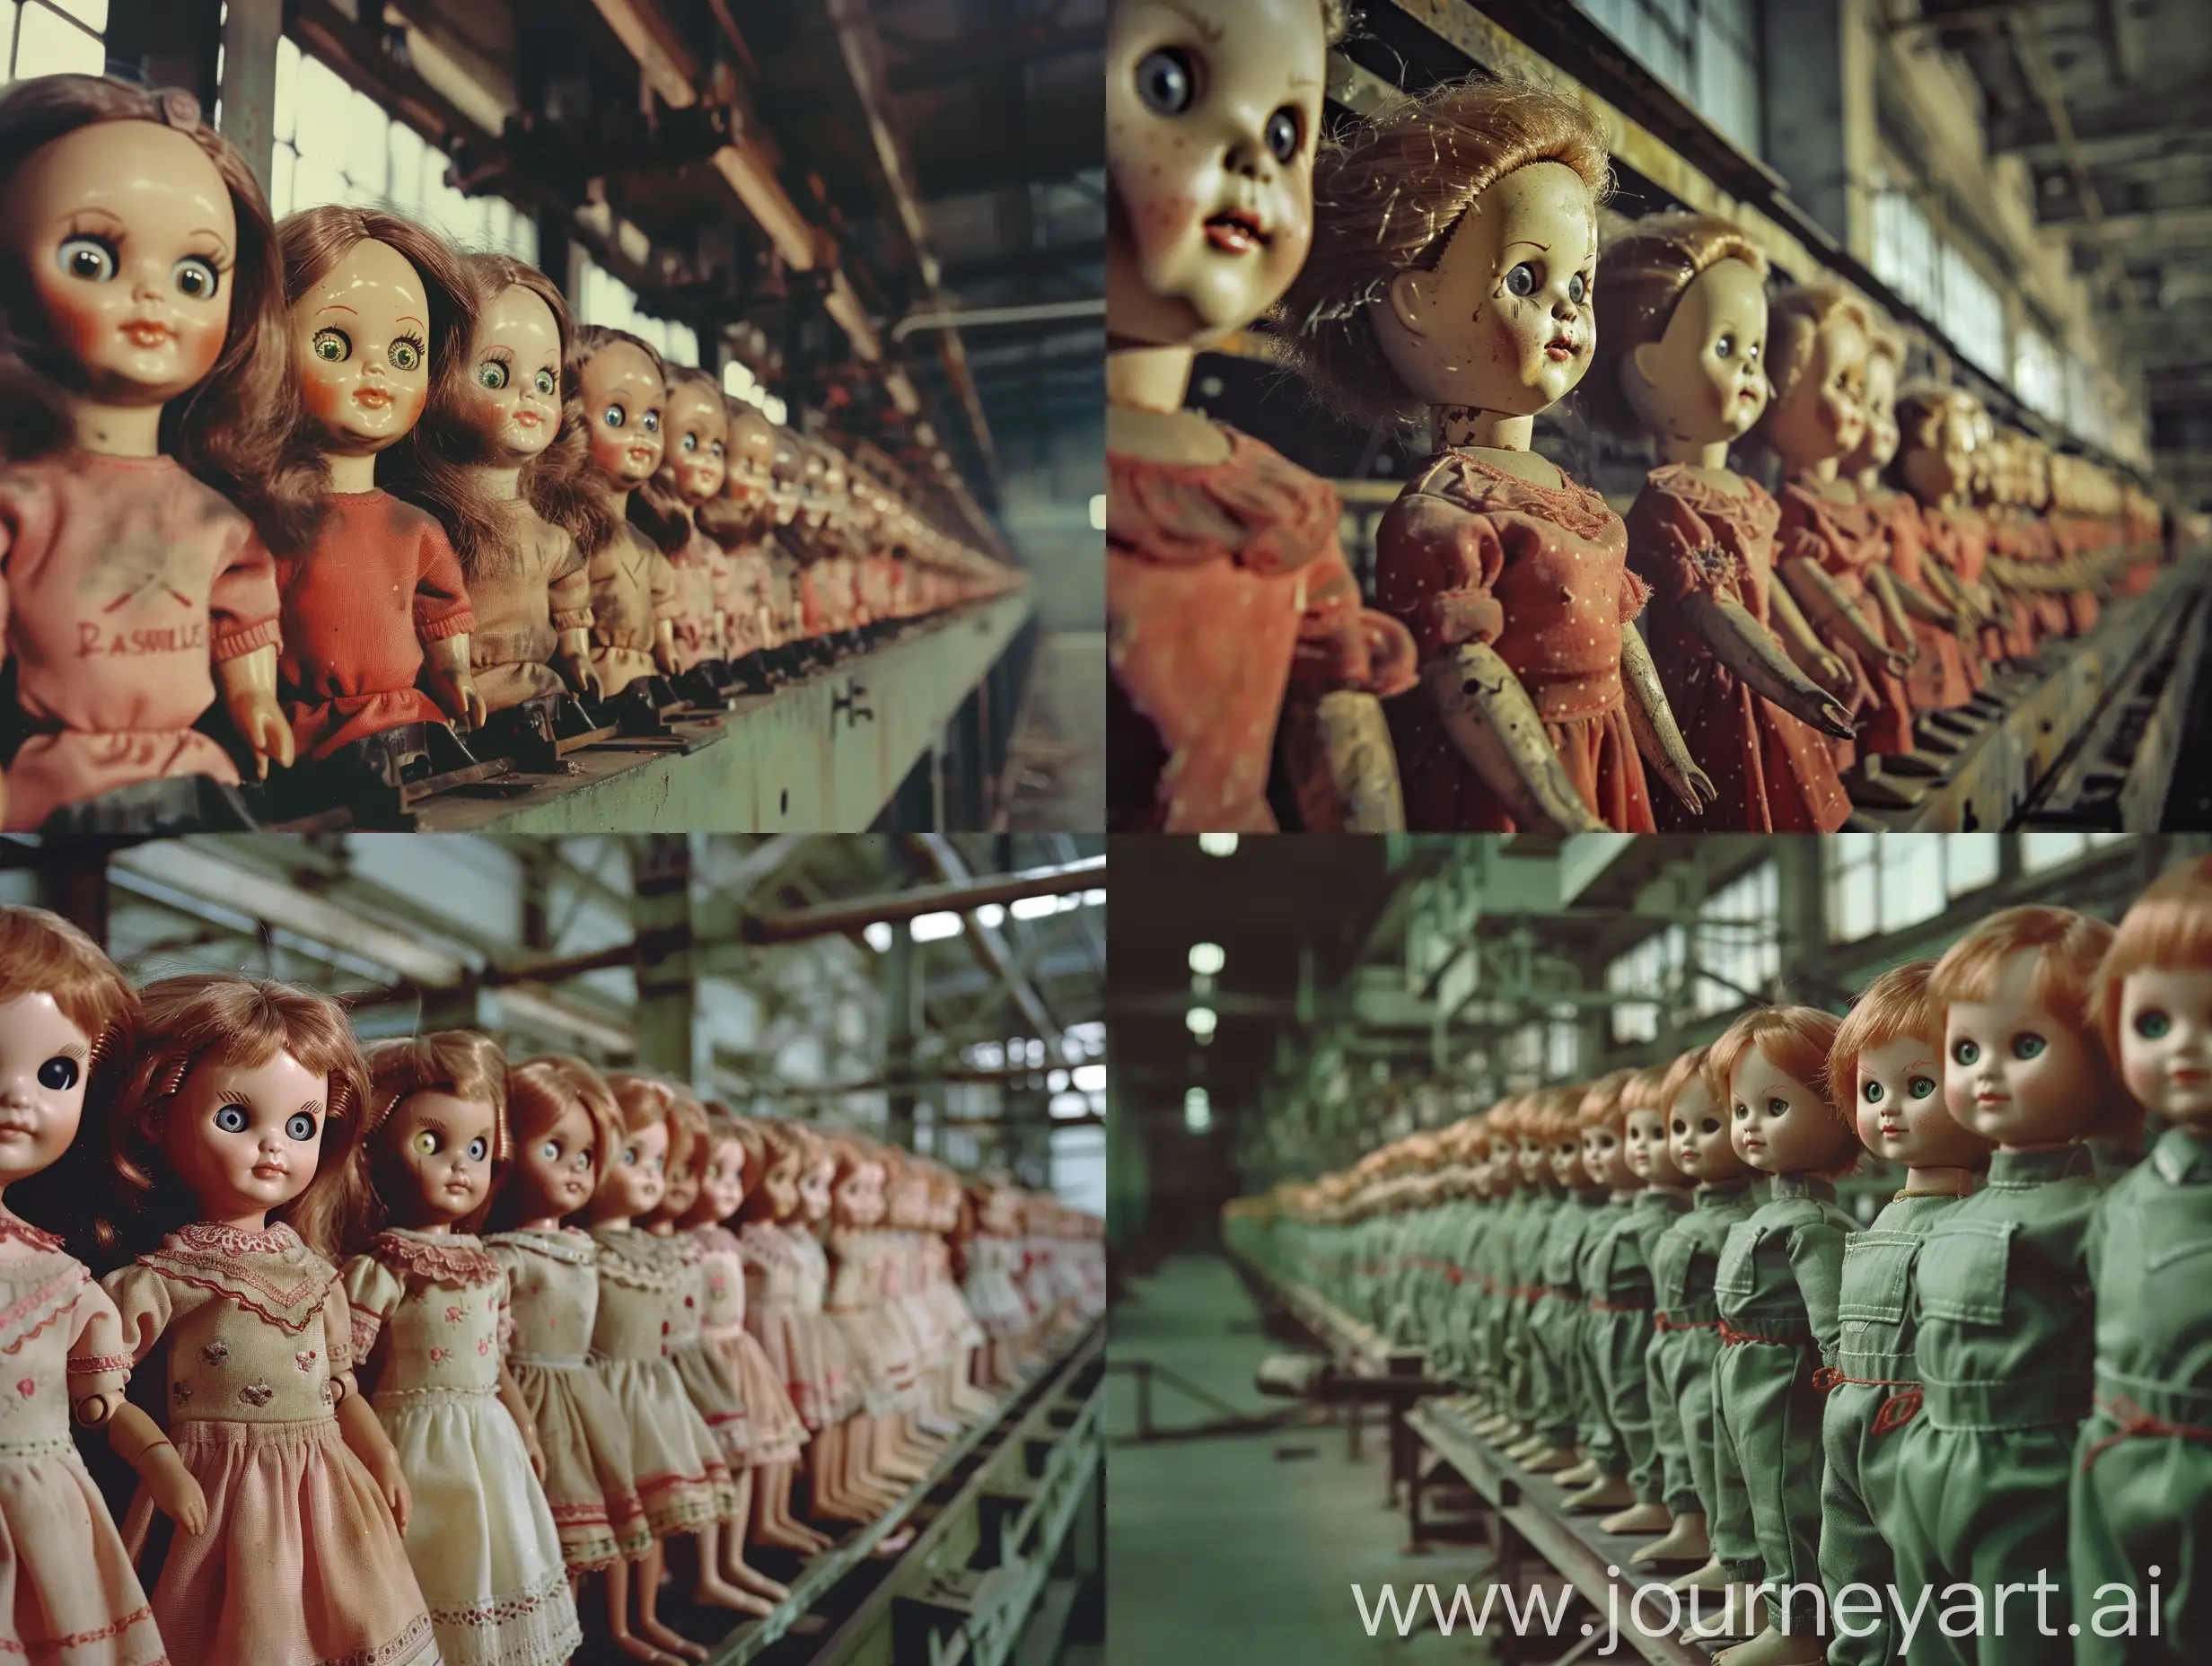 1980s-Abandoned-Factory-Identical-Dolls-Producing-More-in-a-Haunting-Display-of-Realism-and-Drama